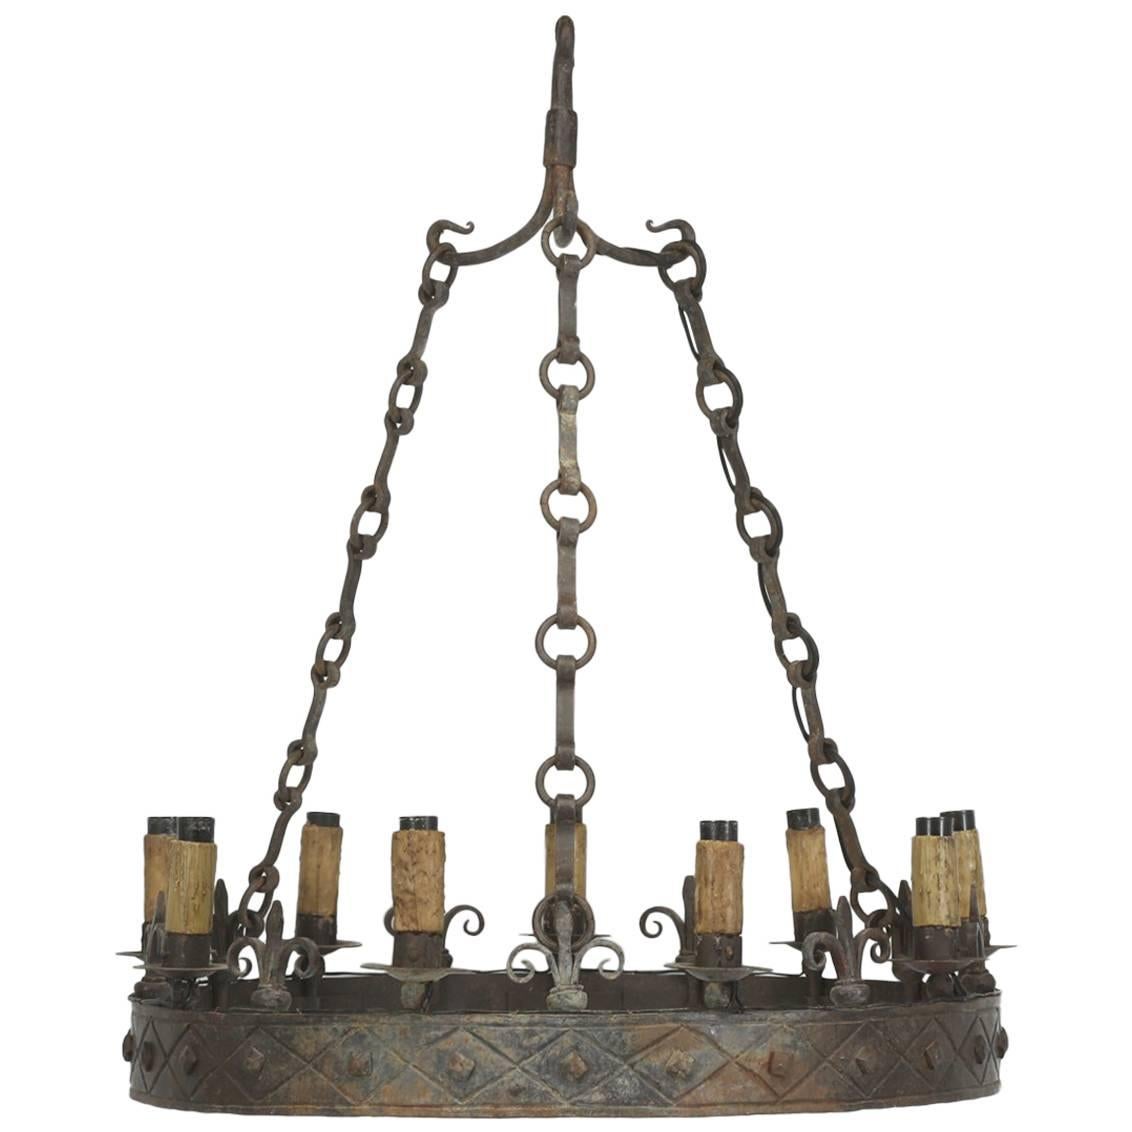 Antique French Hand-Forged Iron Chandelier, circa 1900